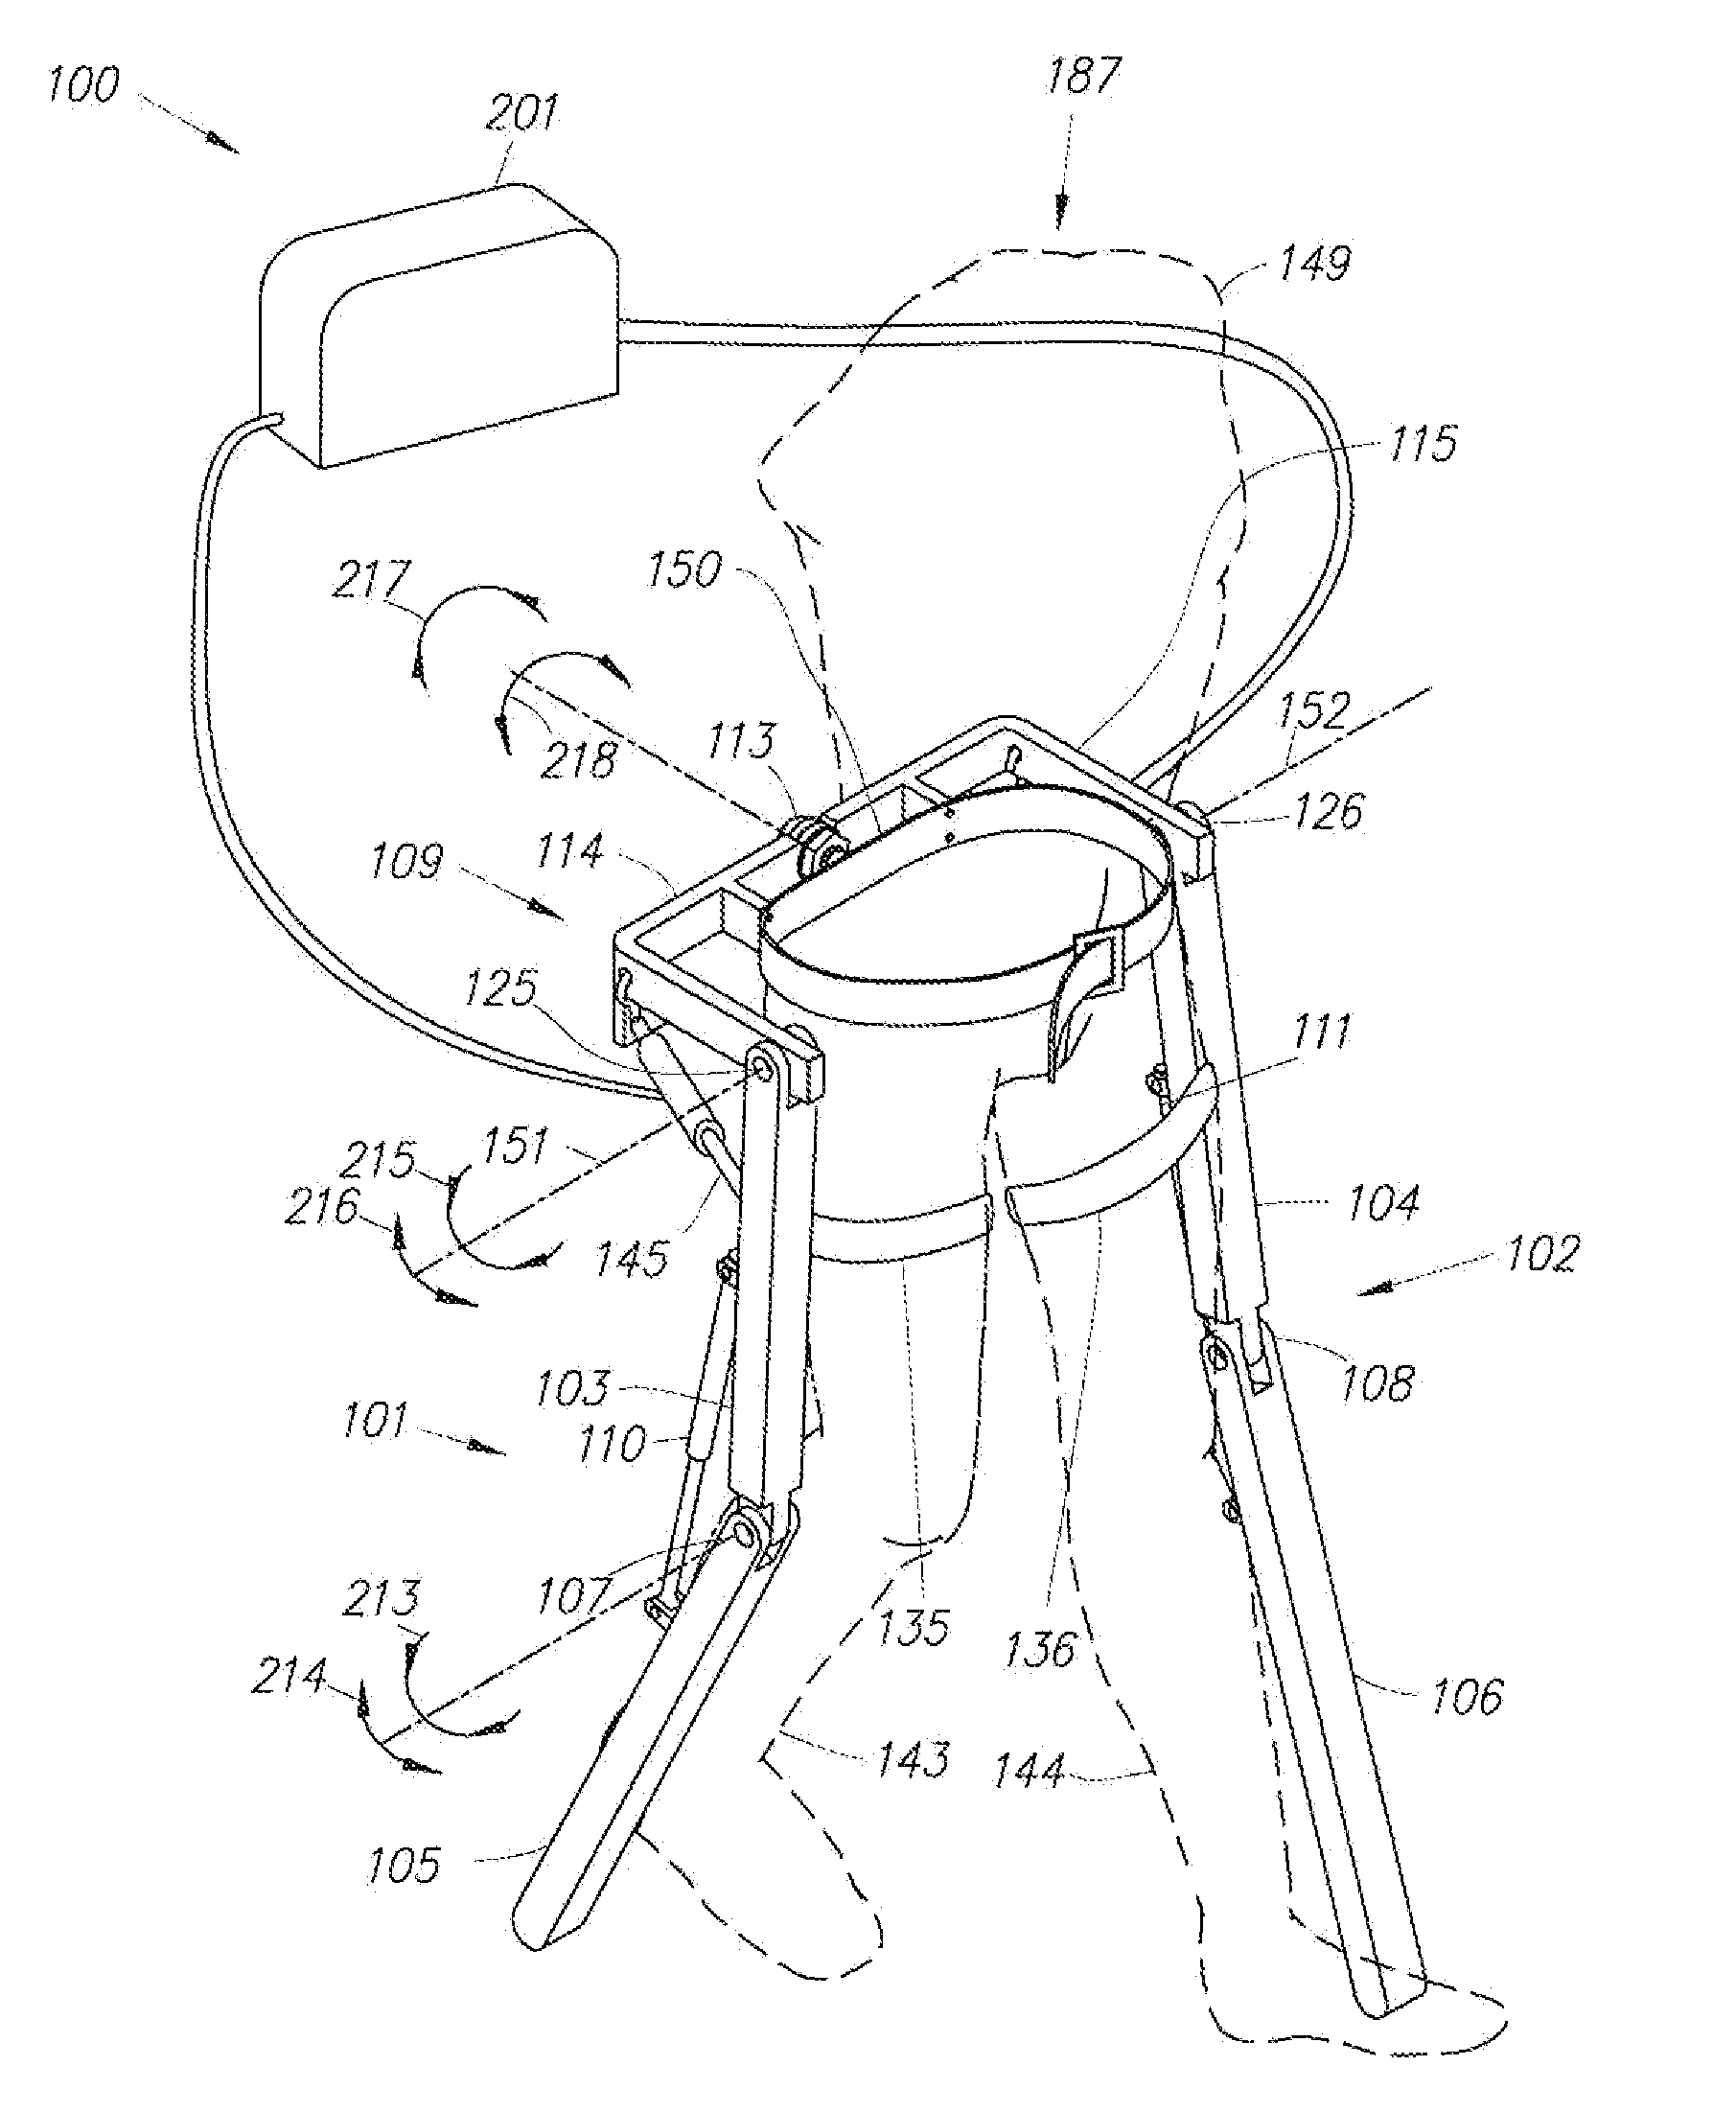 Device and Method for Decreasing Energy Consumption of a Person by Use of a Lower Extremity Exoskeleton